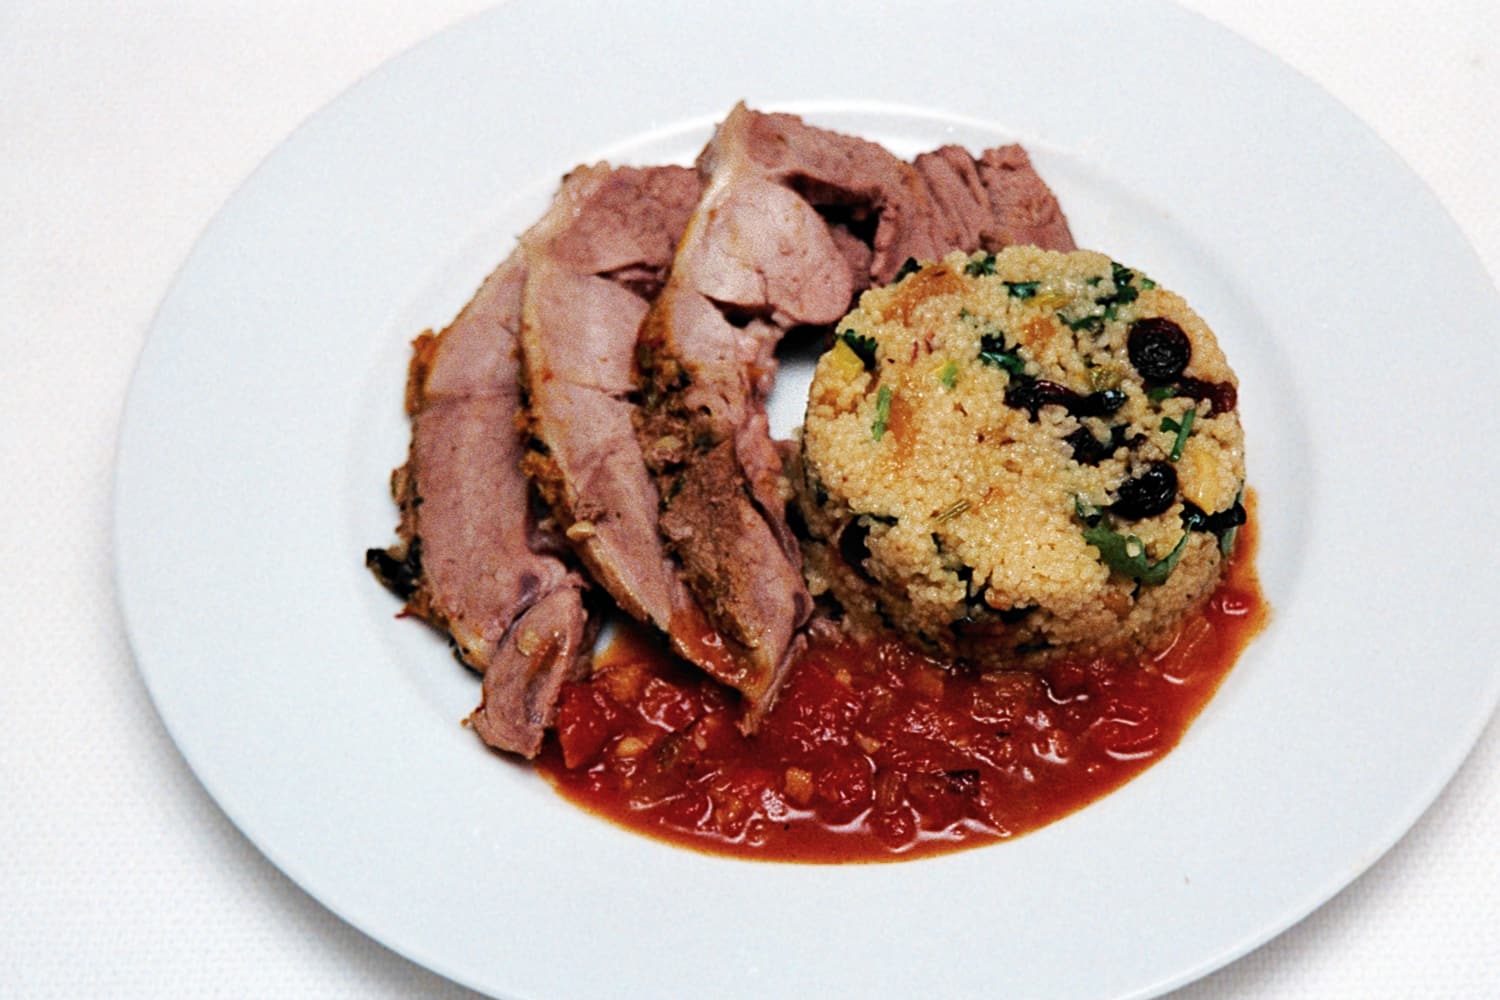 Steamed North African Leg of Lamb with Fruit Cous Cous served